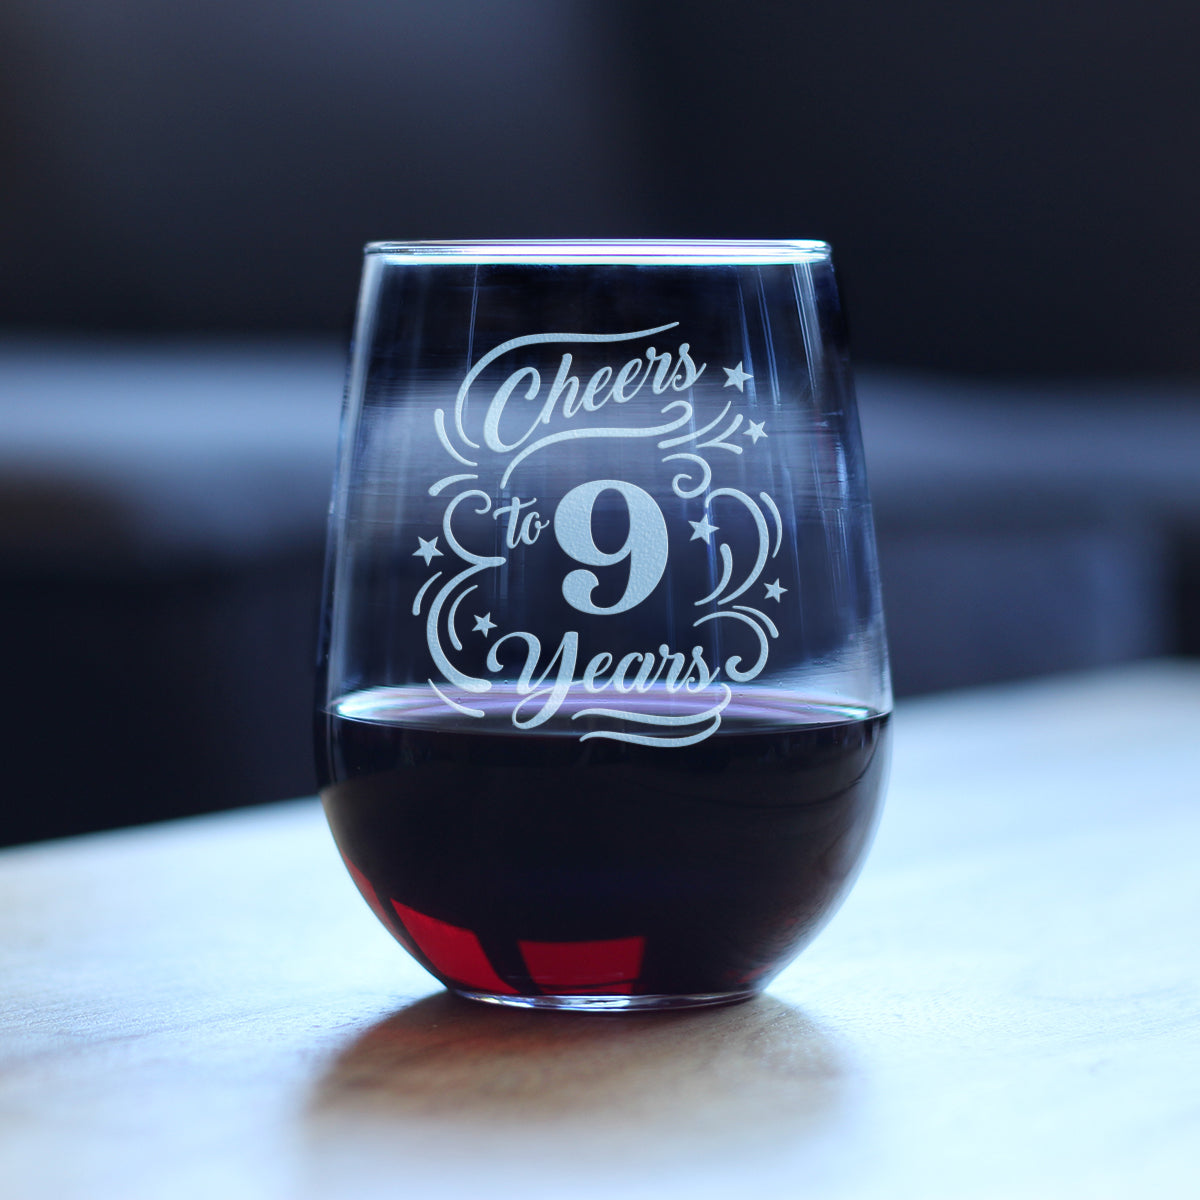 Cheers to 9 Years - Stemless Wine Glass Gifts for Women &amp; Men - 9th Anniversary Party Decor - Large 17 Oz Glasses